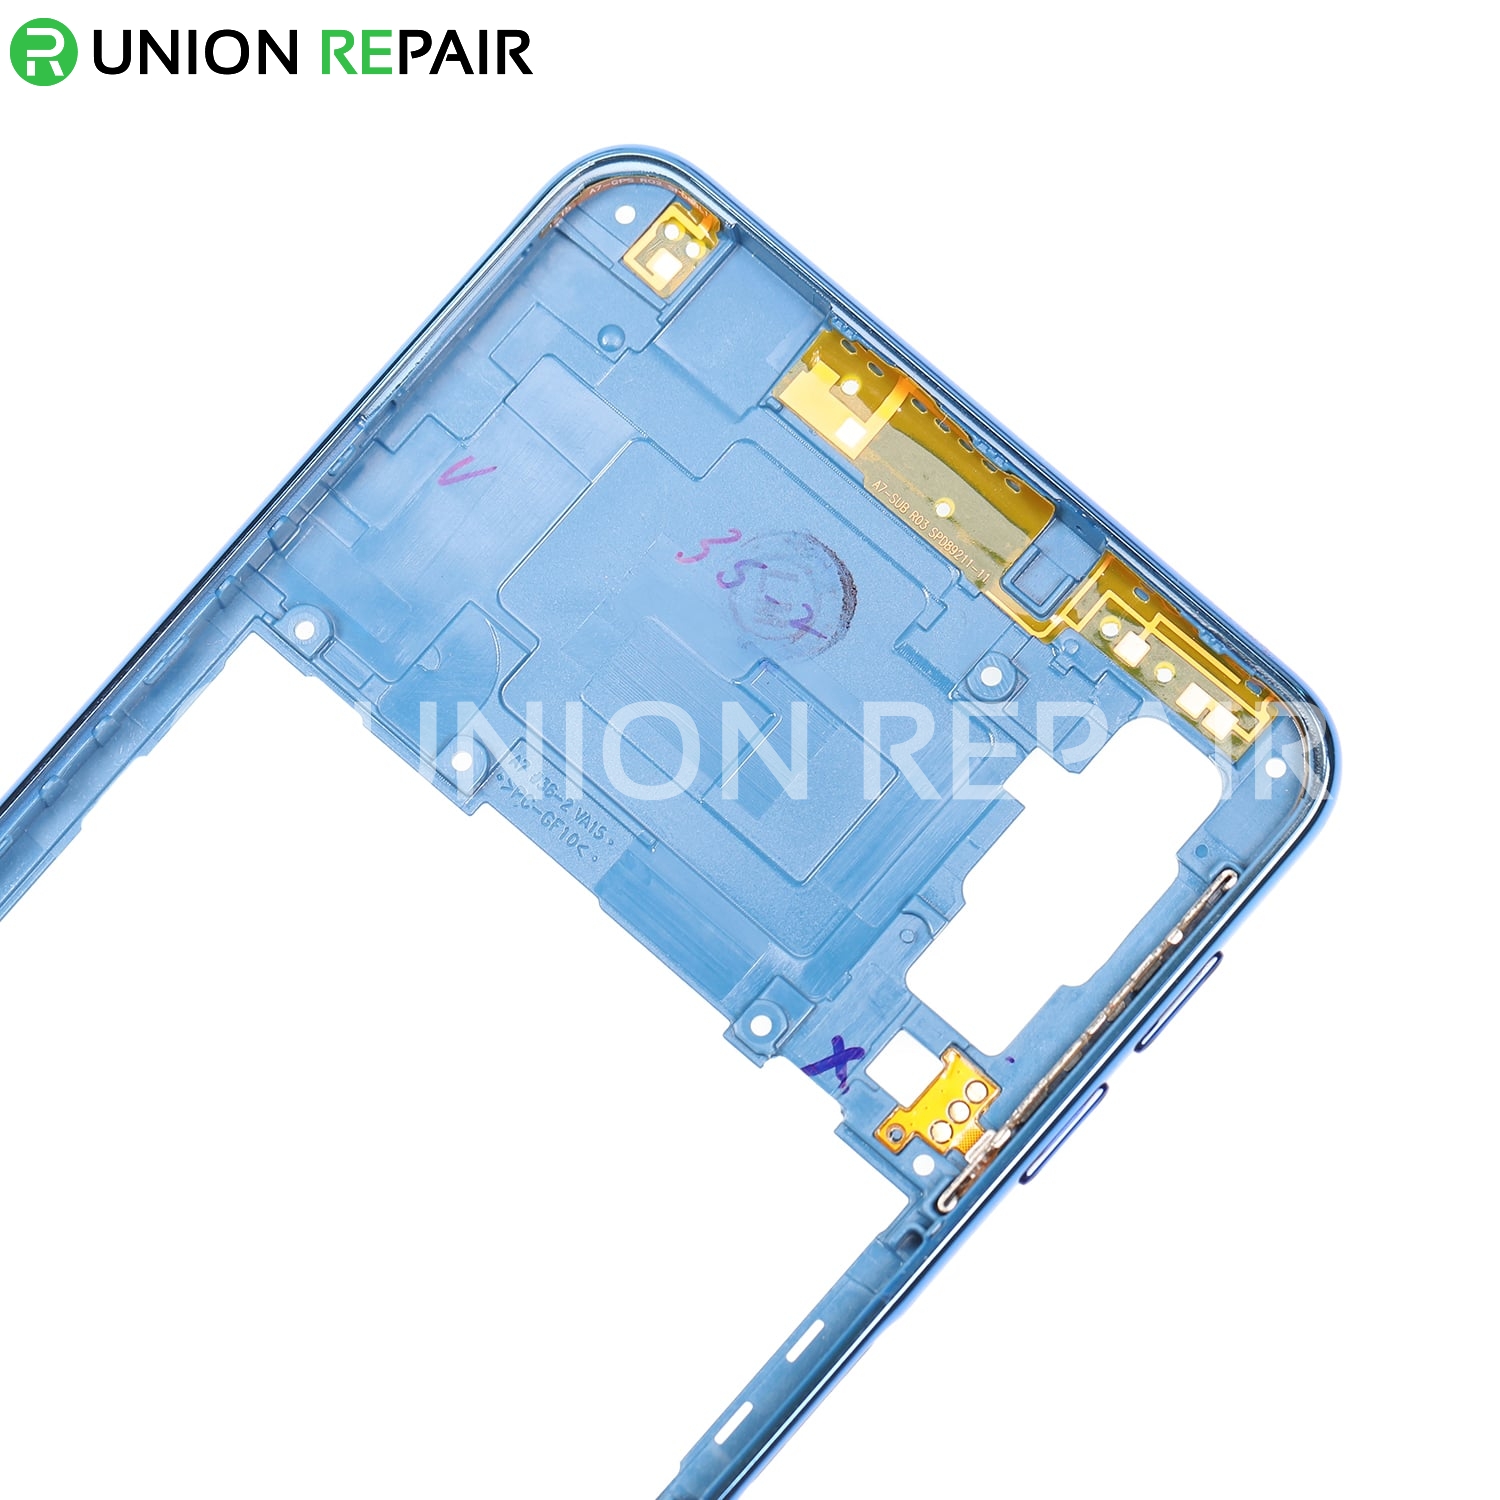 Replacement for Samsung Galaxy A7 (2018) SM-A750 Rear Housing - Blue